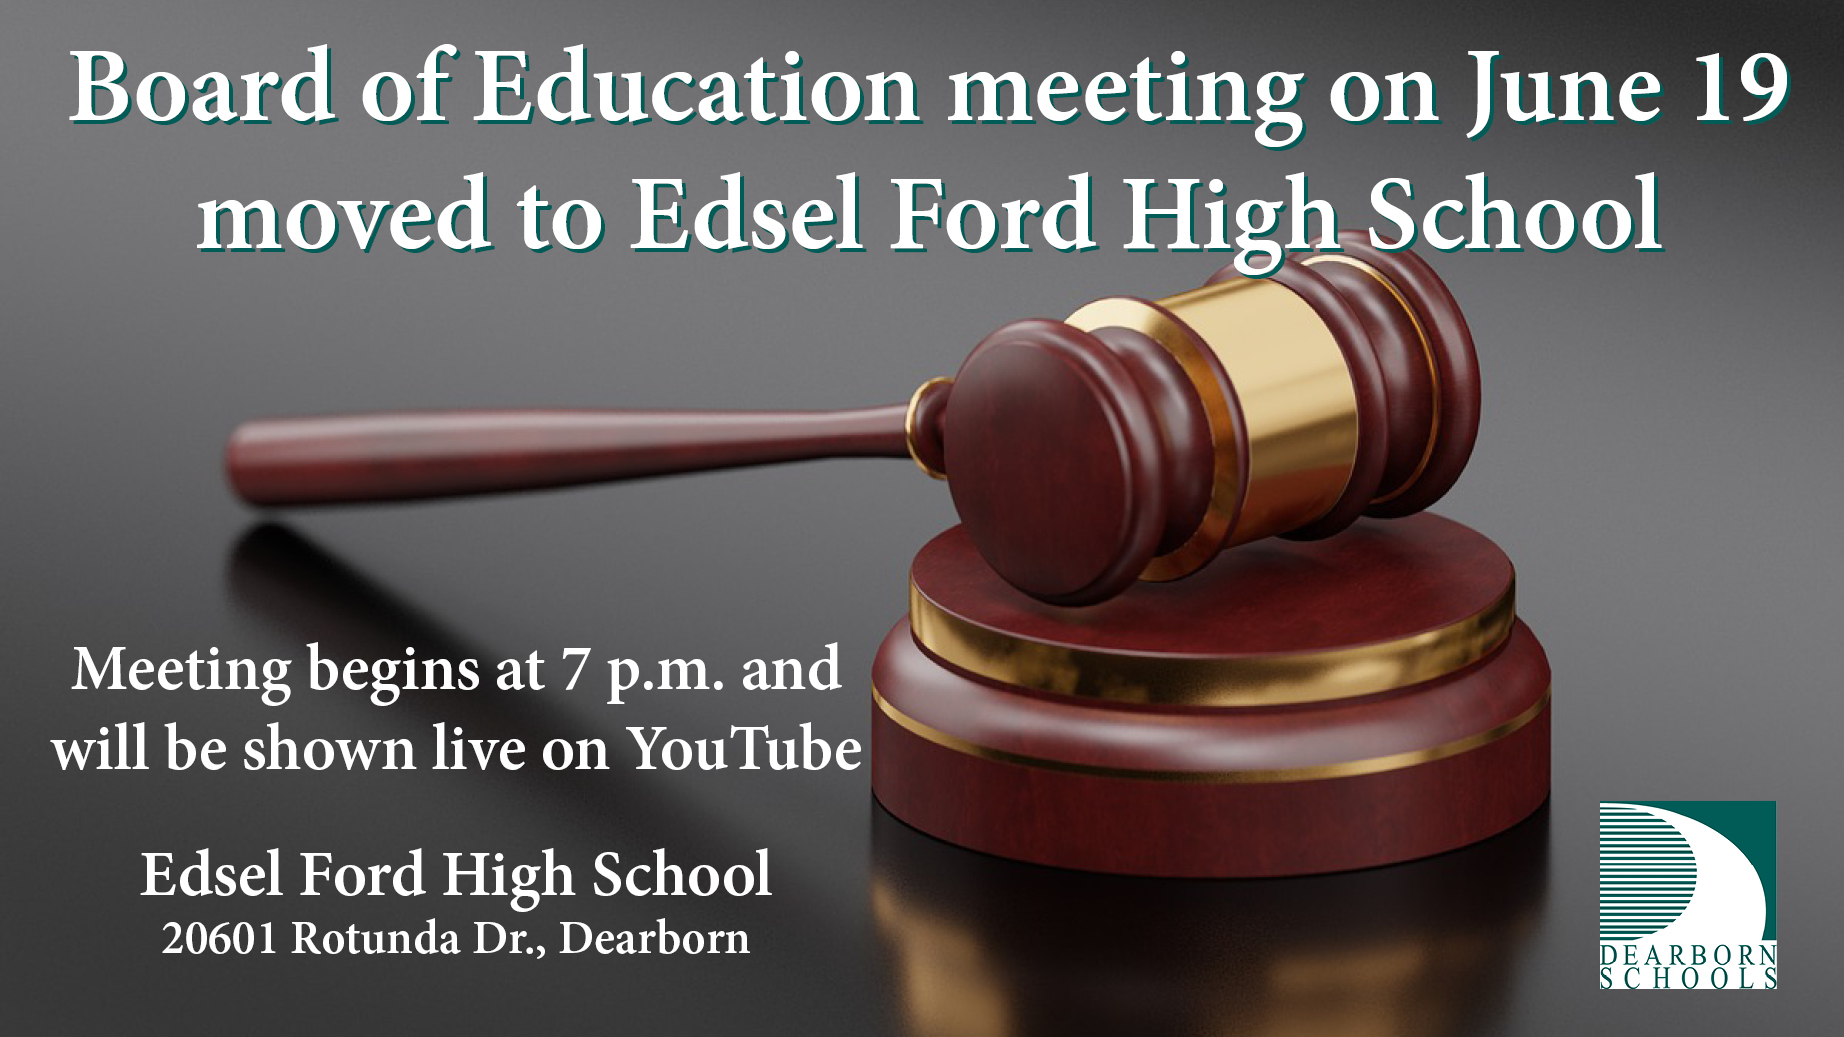 Flyer announcing June 19 Board of Education meeting is moved to Edsel Ford High